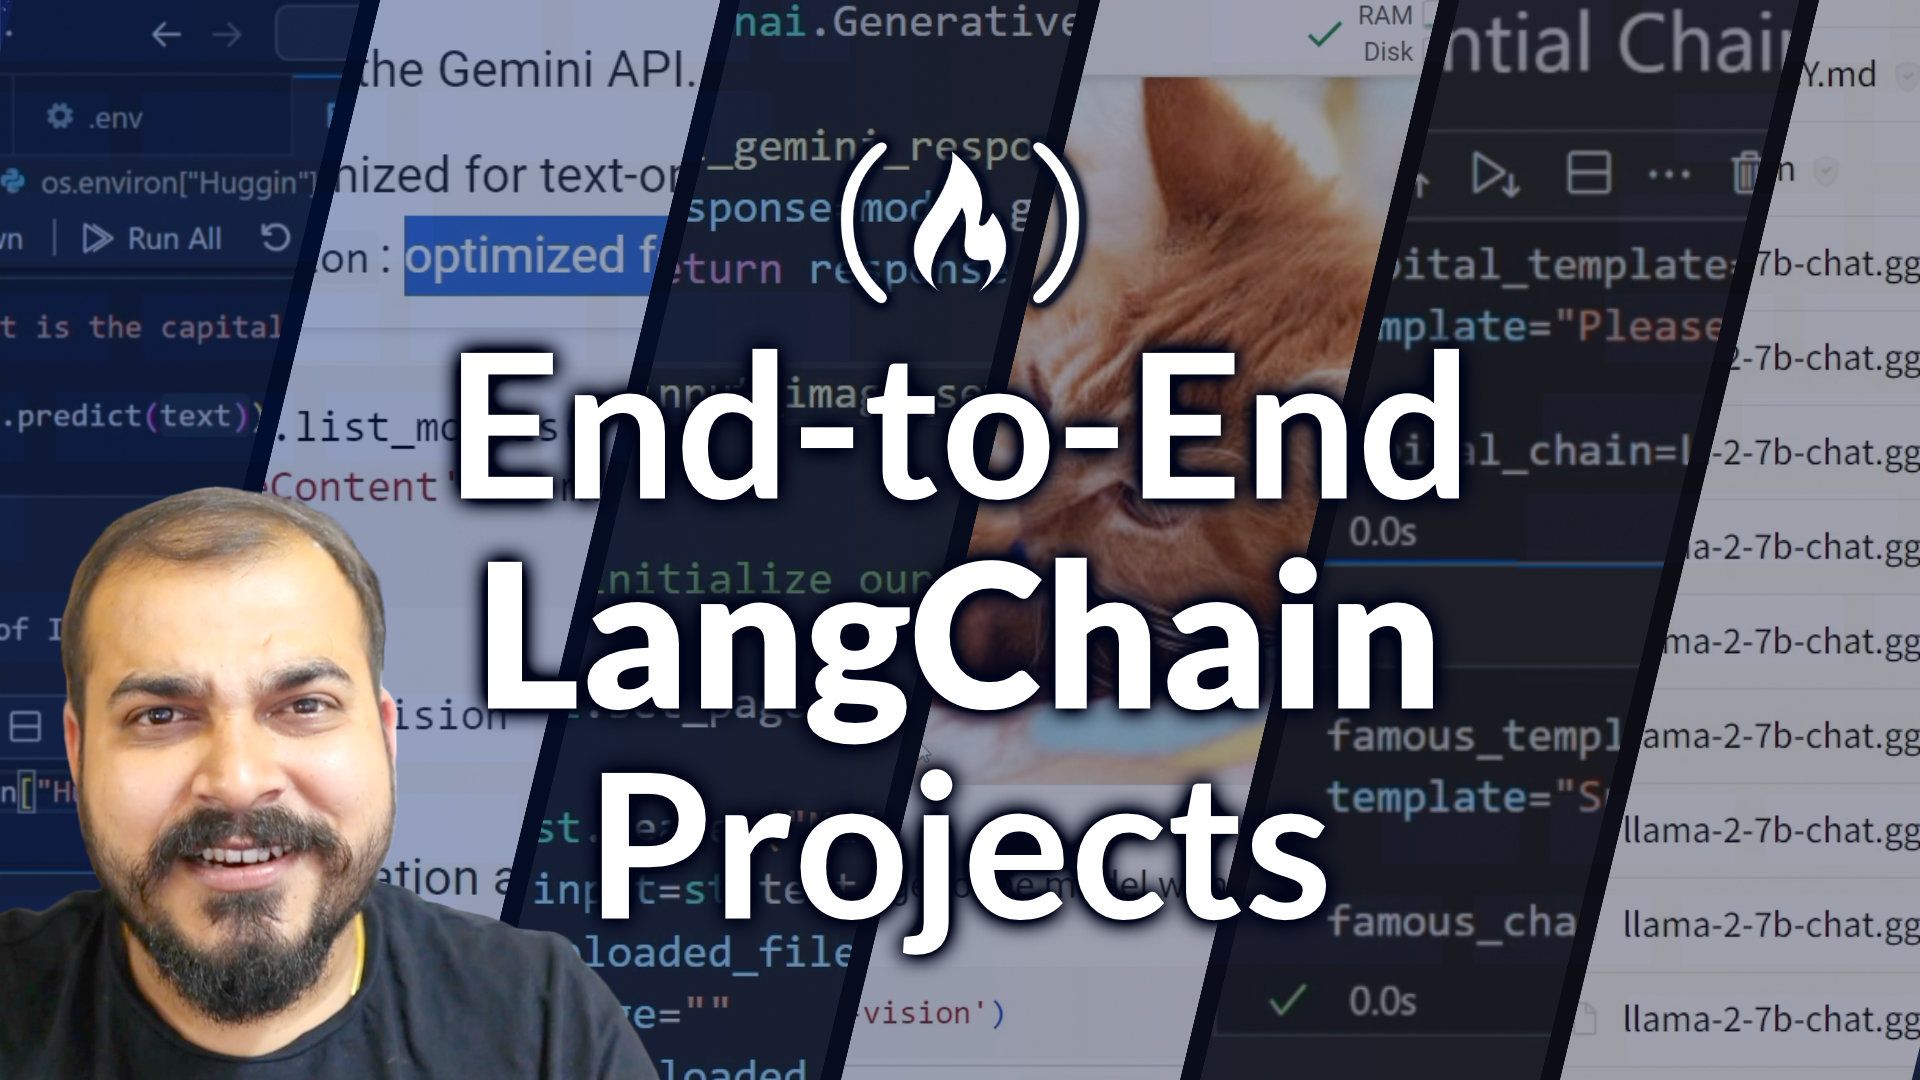 Learn LangChain and Gen AI by Building 6 Projects